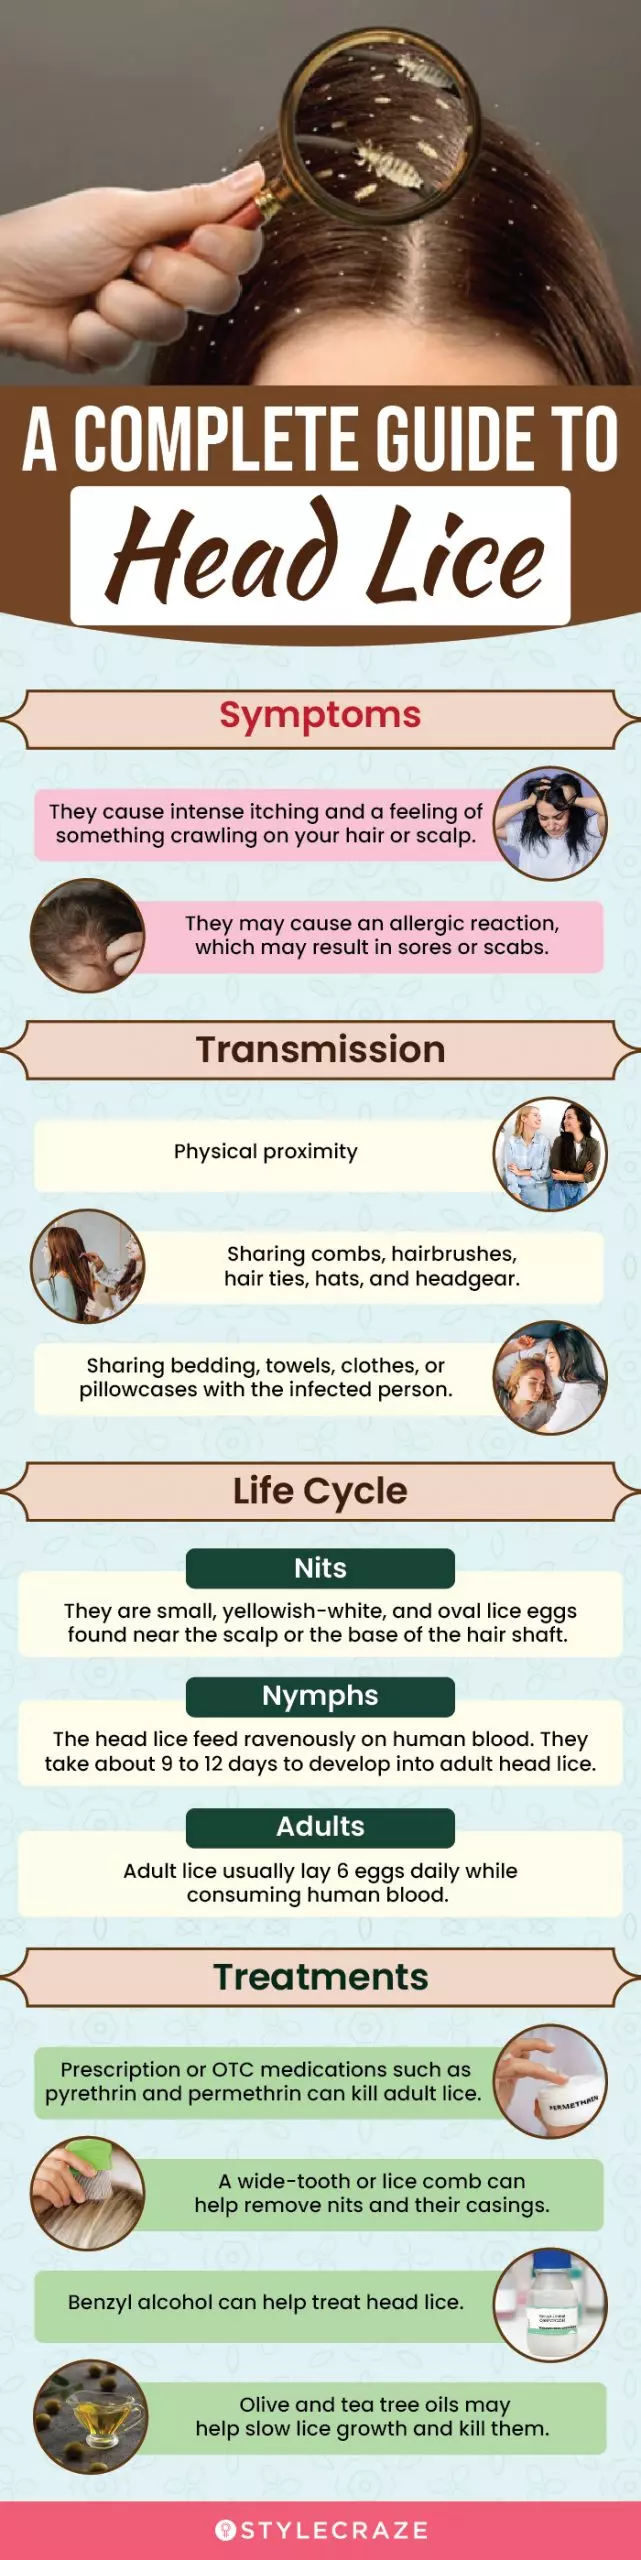 a complete guide to head lice (infographic)